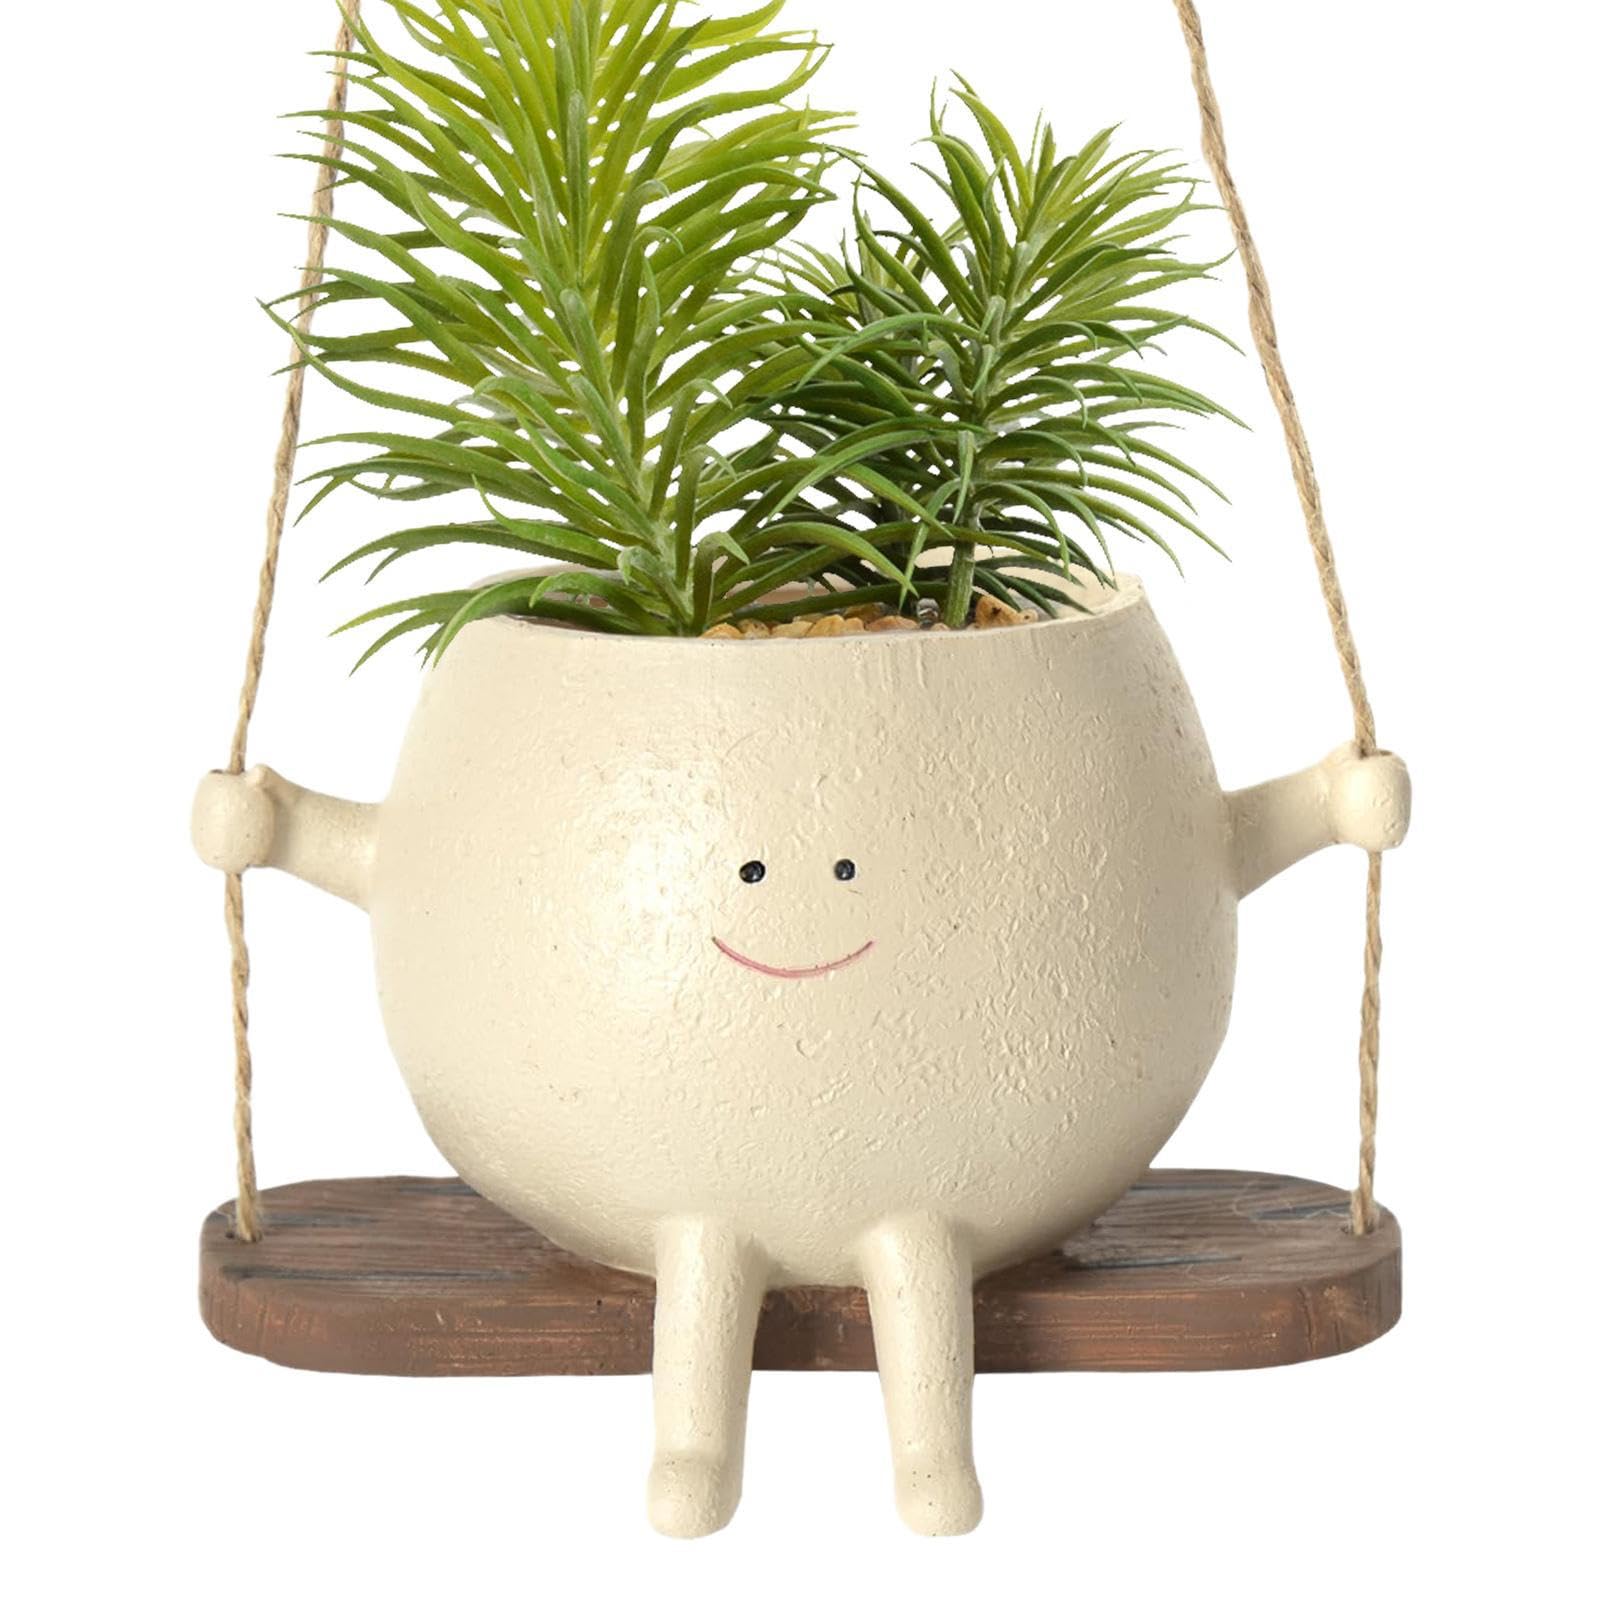 🌵Planter, Wall Mounted Planter, Smiley Resin Planter (Including Plants)